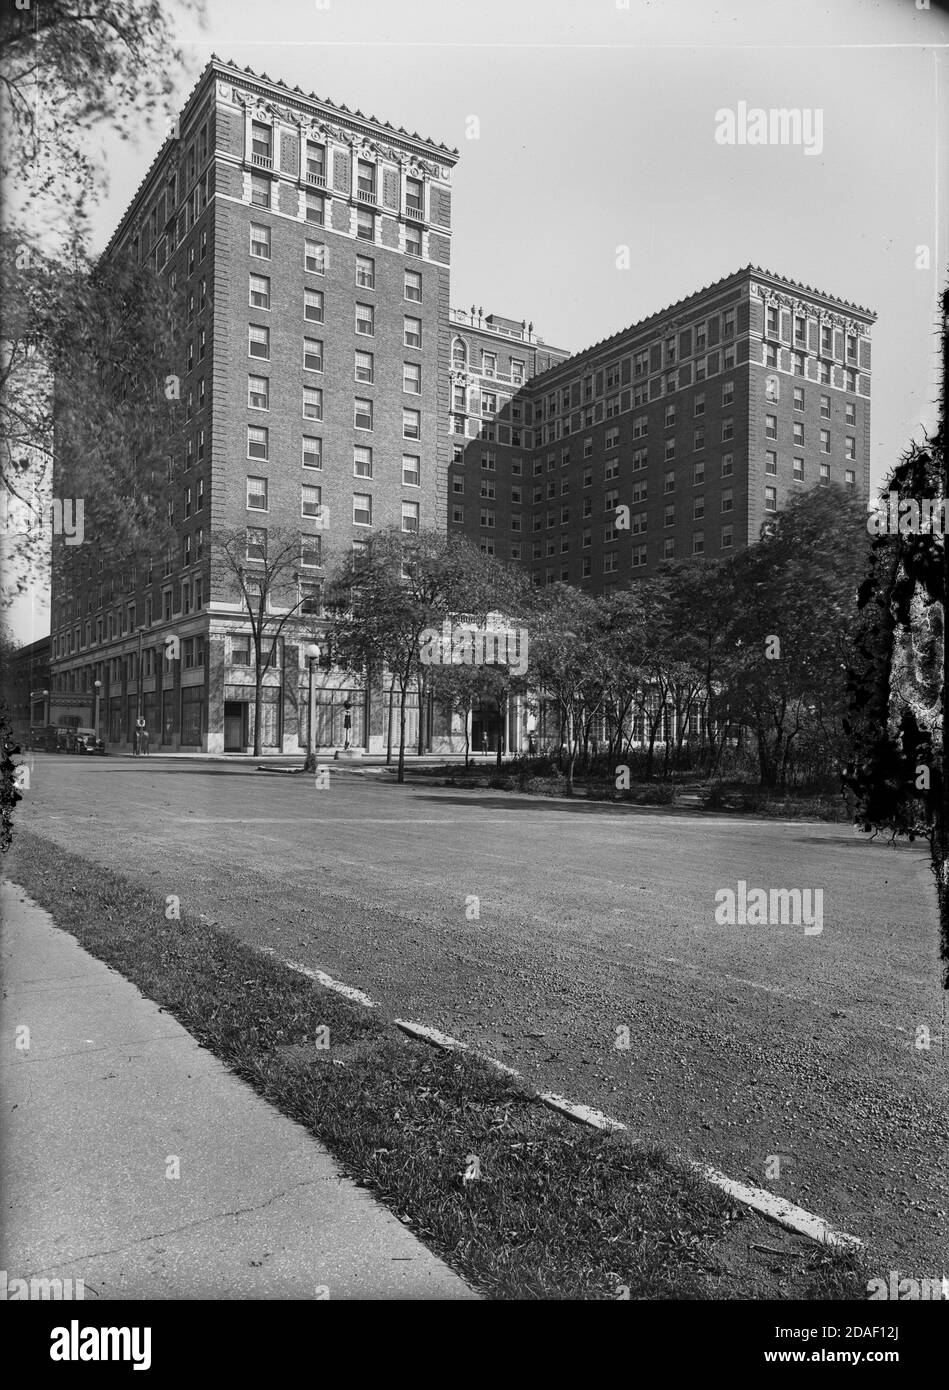 Elevation of Belmont Hotel, architect Fugard and Knapp, at 3156 Sheridan Road in Chicago, Illinois, circa 1923-1936. Stock Photo